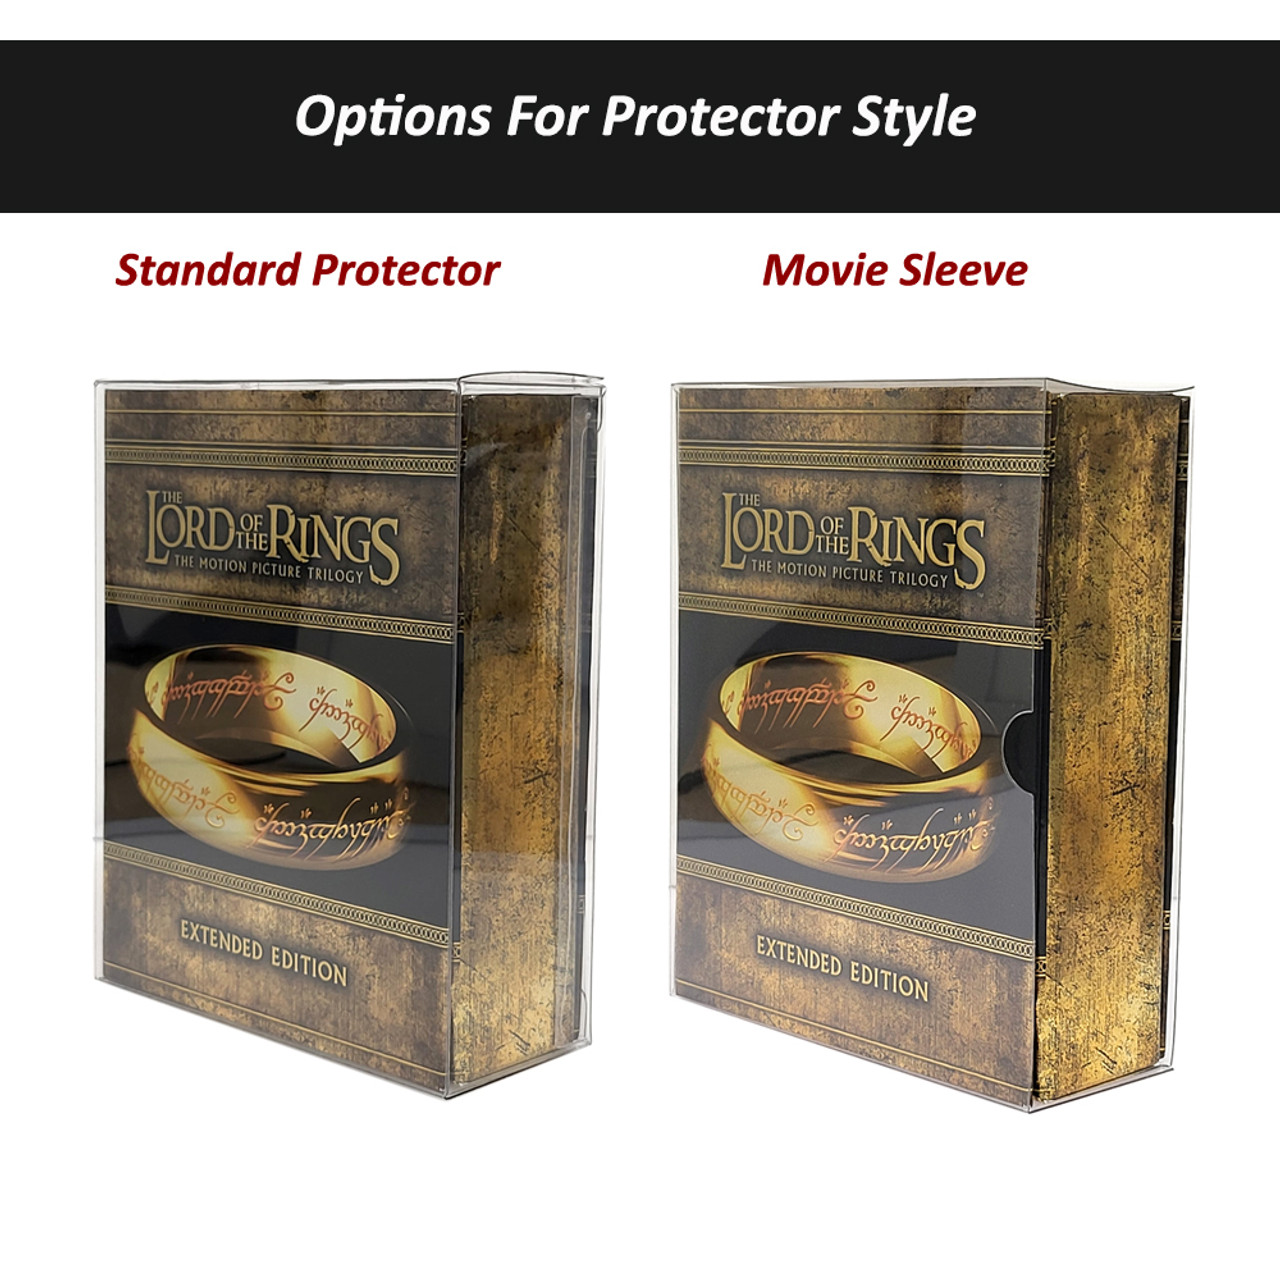 Protector For Dredd 3D Blu-ray France Metal Pack Collector Limited Digipack